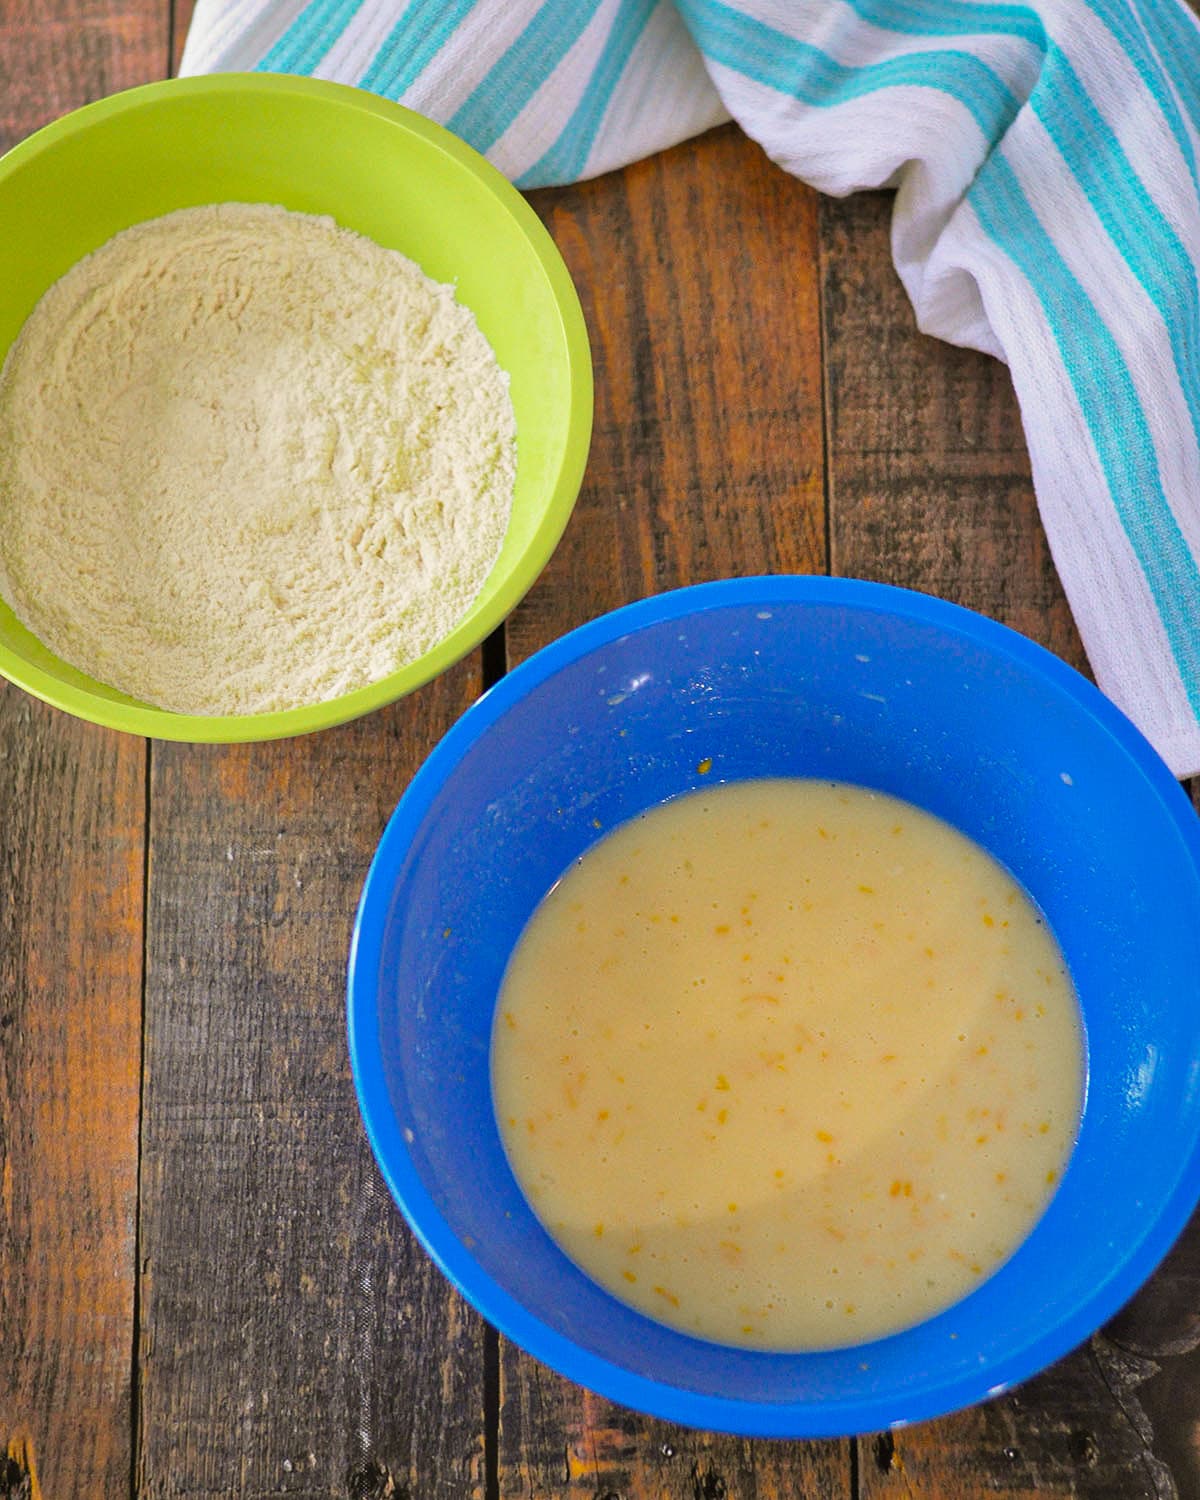 Dry ingredients in one bowl and wet ingredients in another for quick bread.